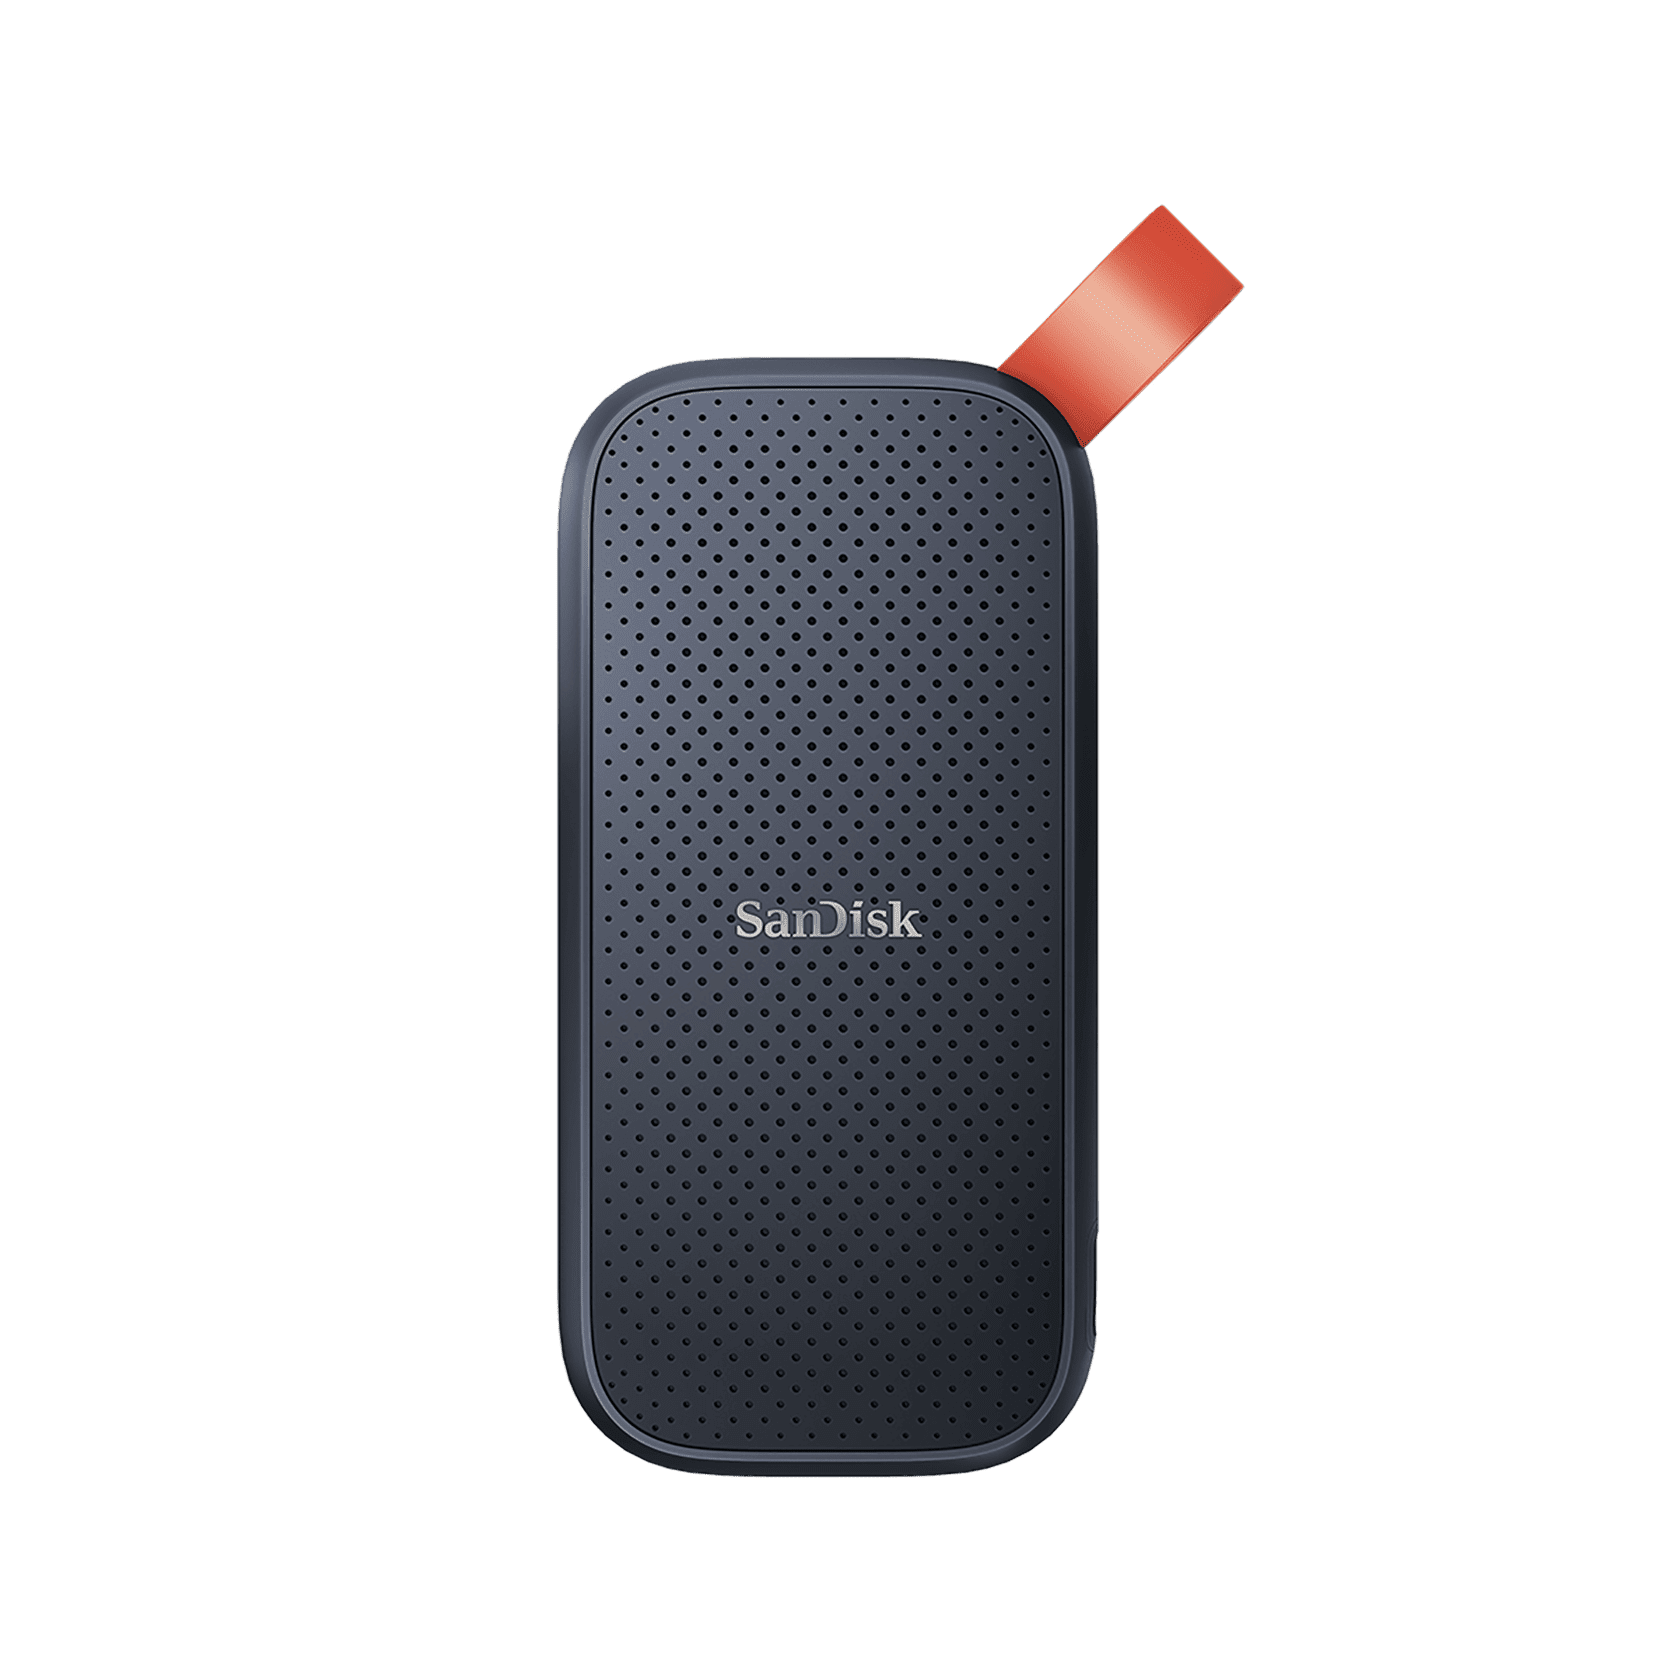  SanDisk 2TB Extreme Portable SSD - Up to 1050MB/s, USB-C, USB  3.2 Gen 2, IP65 Water and Dust Resistance, Updated Firmware - External  Solid State Drive - SDSSDE61-2T00-G25 : Electronics